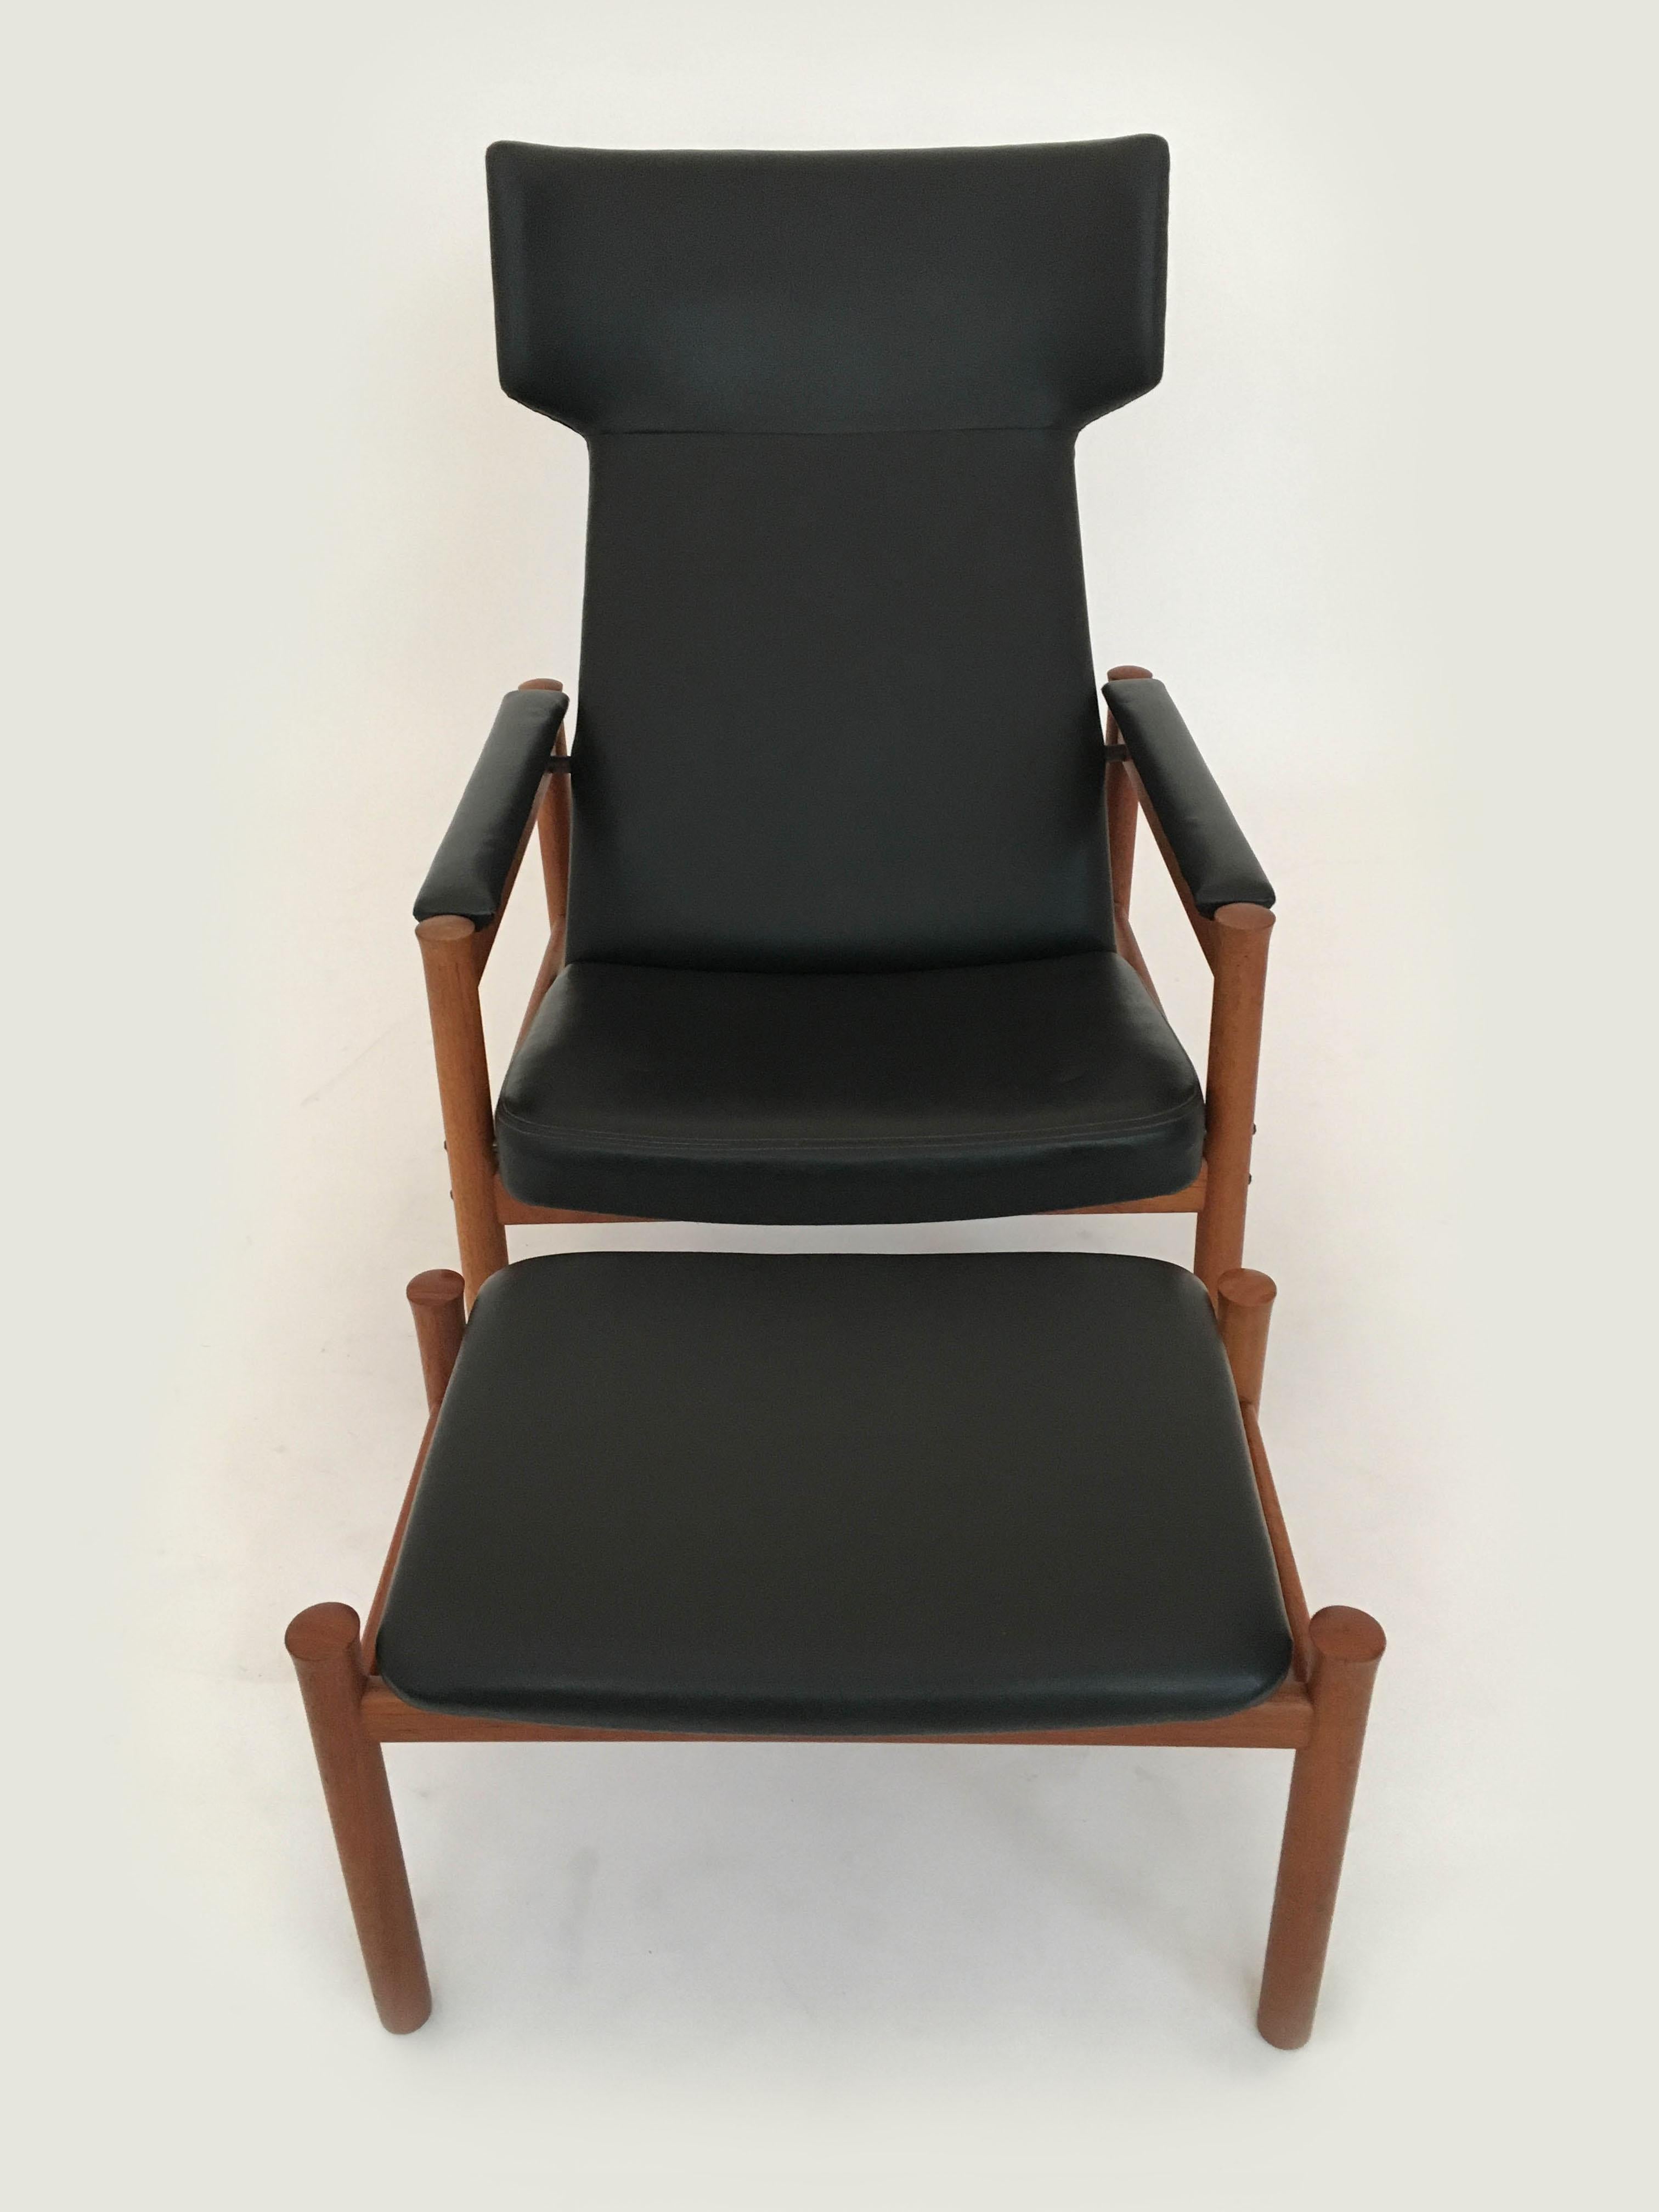 Rare example of the model '4365' vintage lounge chair designed by Soren Hansen in 1963 and produced by Fritz Hansen in 1967 in Denmark. Exaggerated wing shape with solid teak frame and matching footstool; original Leatherette upholstery in place.